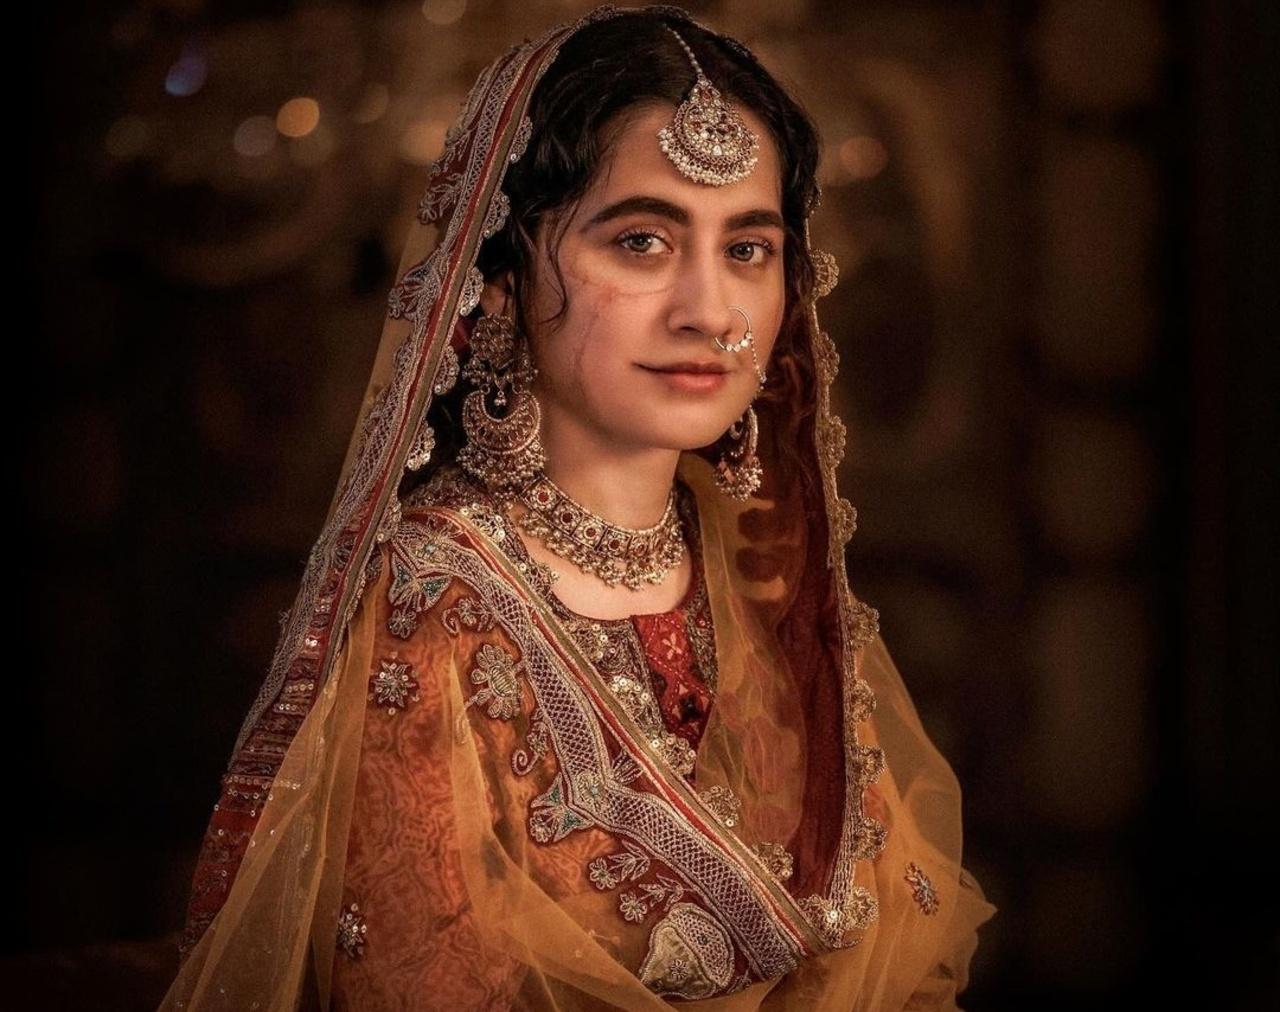 Sanjeeda Shaikh stars as Waheeda, who is betrayed and silenced by fate and seeks to find redemption beyond beauty. She is also a courtesan with a scar on her face. 